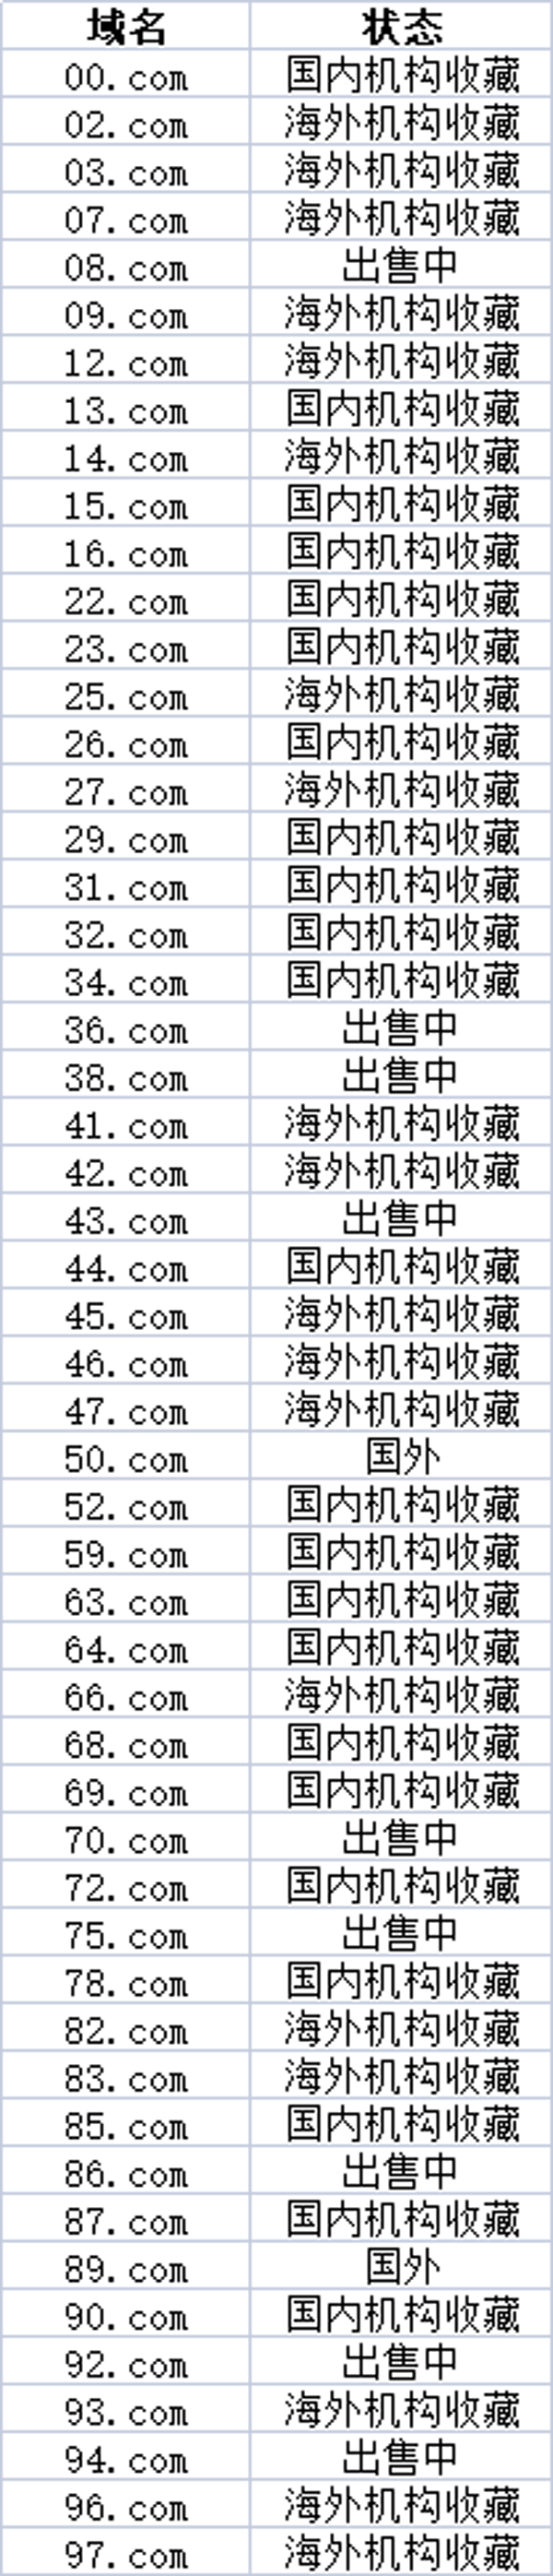 The whole world is in a hurry,the Chinese have taken 80% of the top-level domain names!